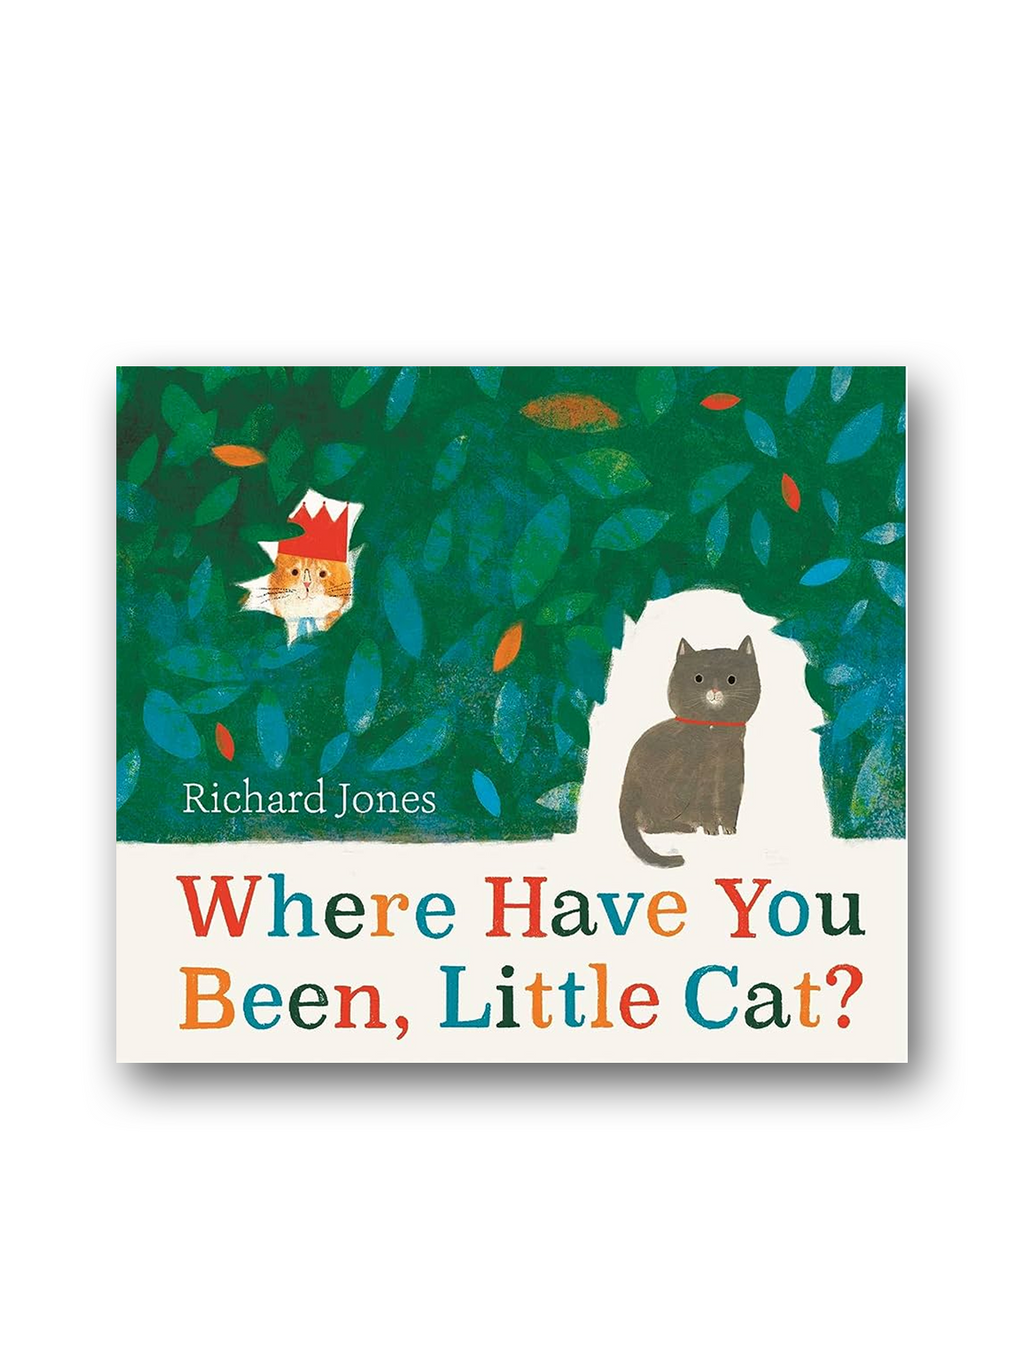 Where Have You Been, Little Cat?